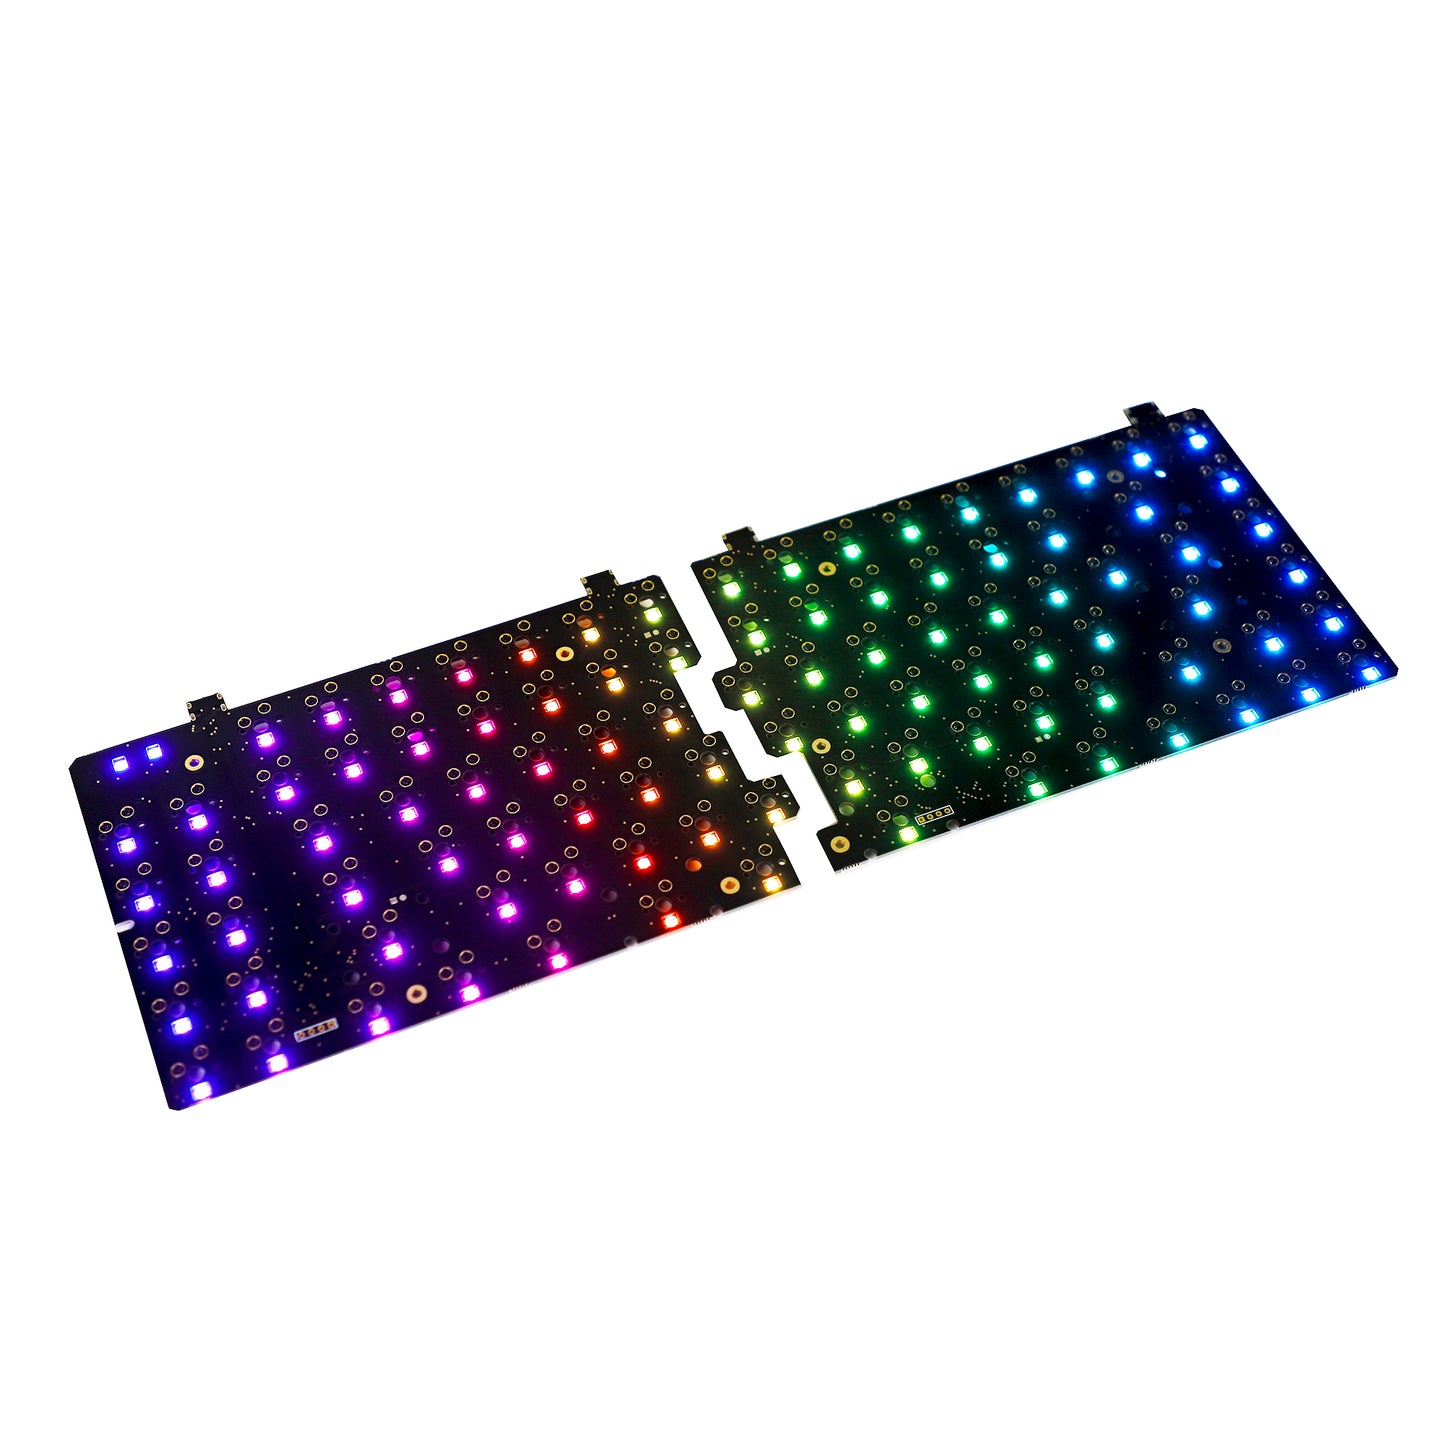 YMDK Split 75% FL84 Forever Love 84 CNC Aluminum Case Plate Hotswap RGB Fully Programmable PCB Stabilizers DIY Kit VIA VIAL Supported Mechanical Keyboard